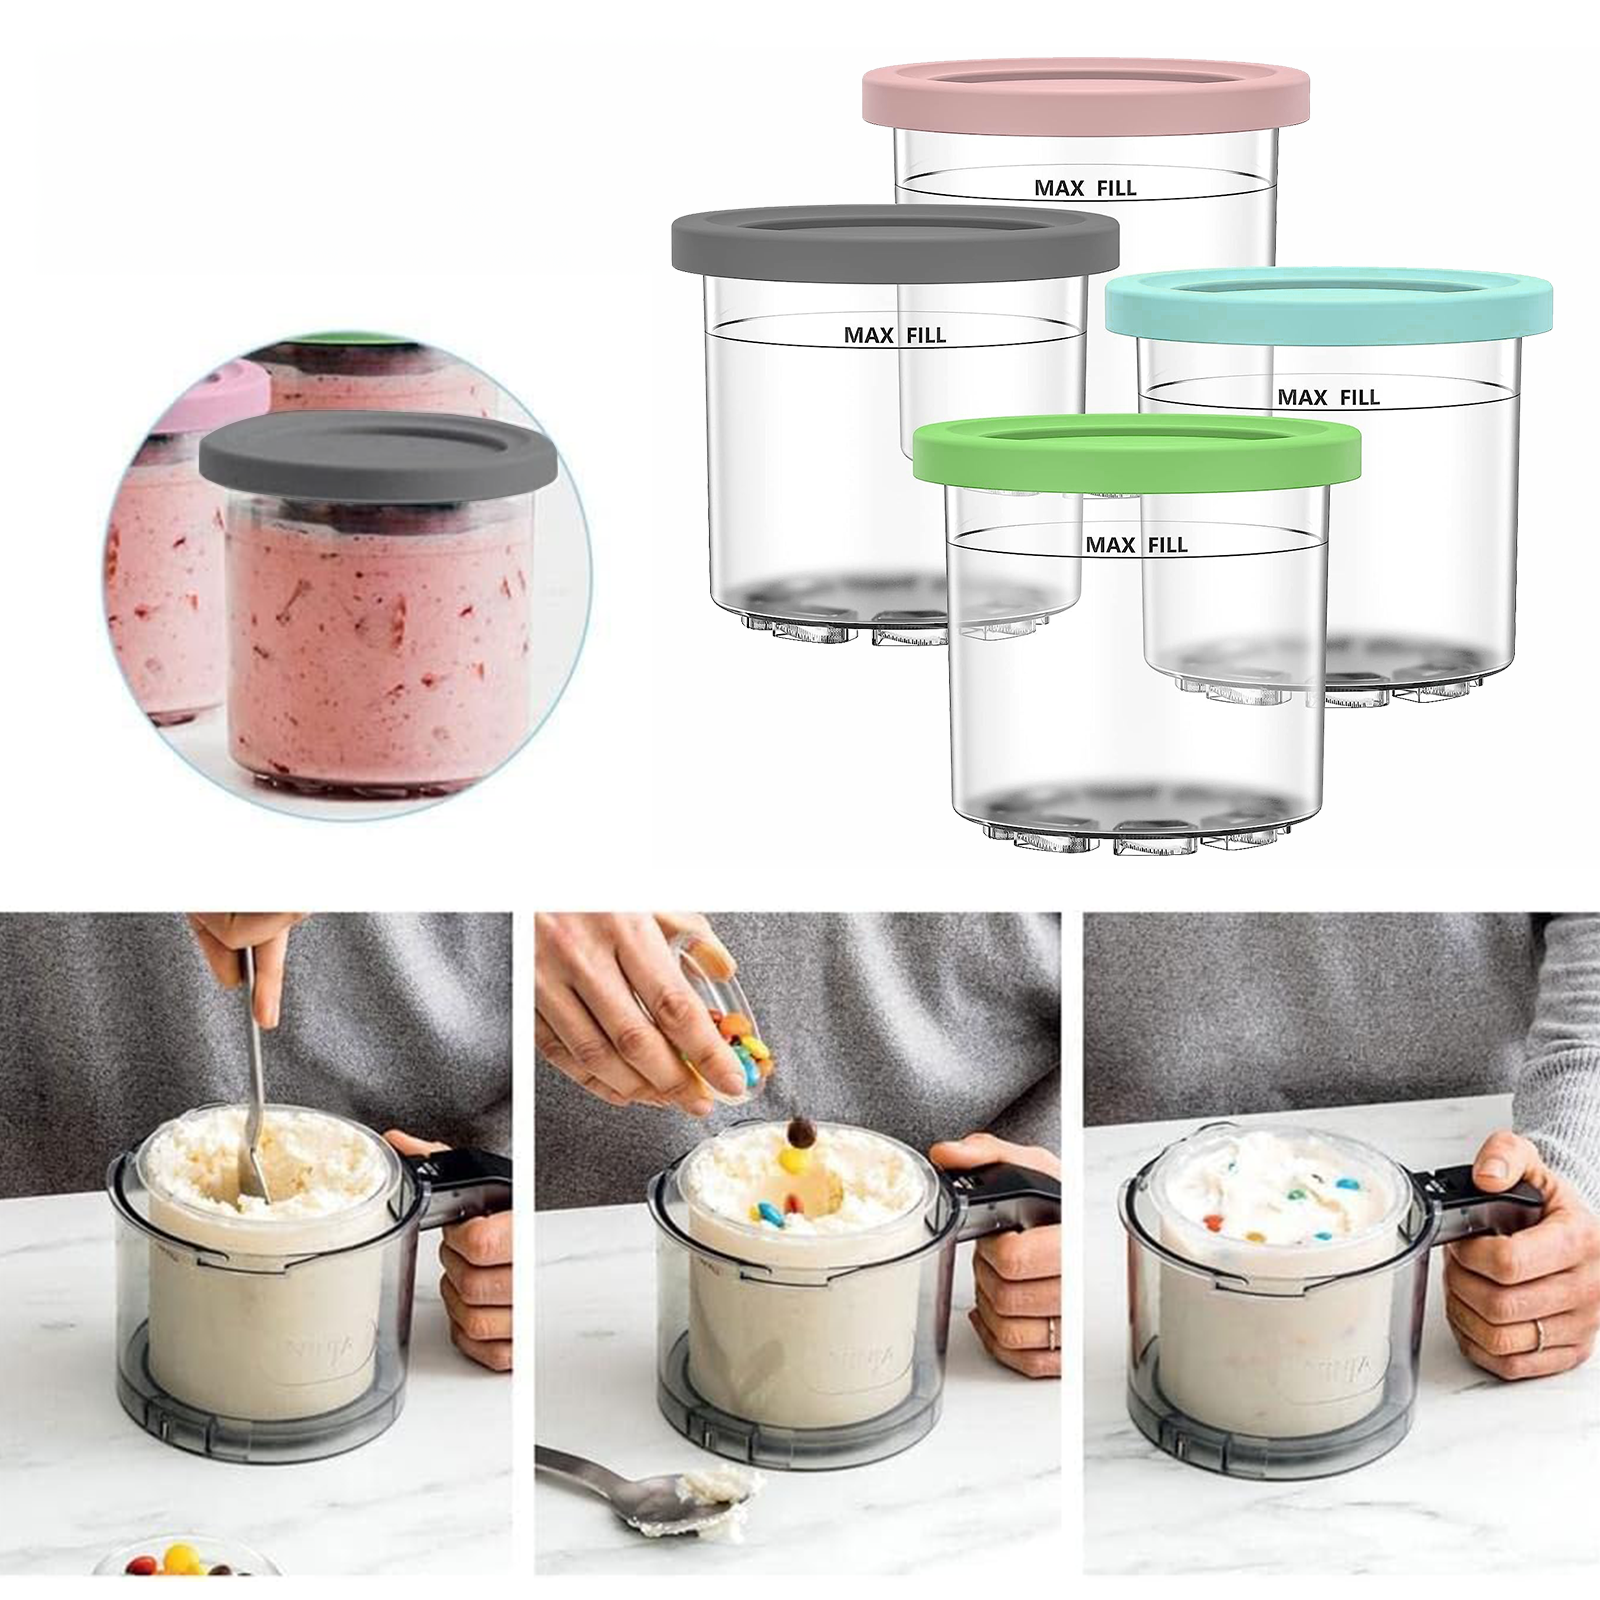 Ice Cream Containers (4 Pcs - 1 Pint Each) for Homemade Ice Cream